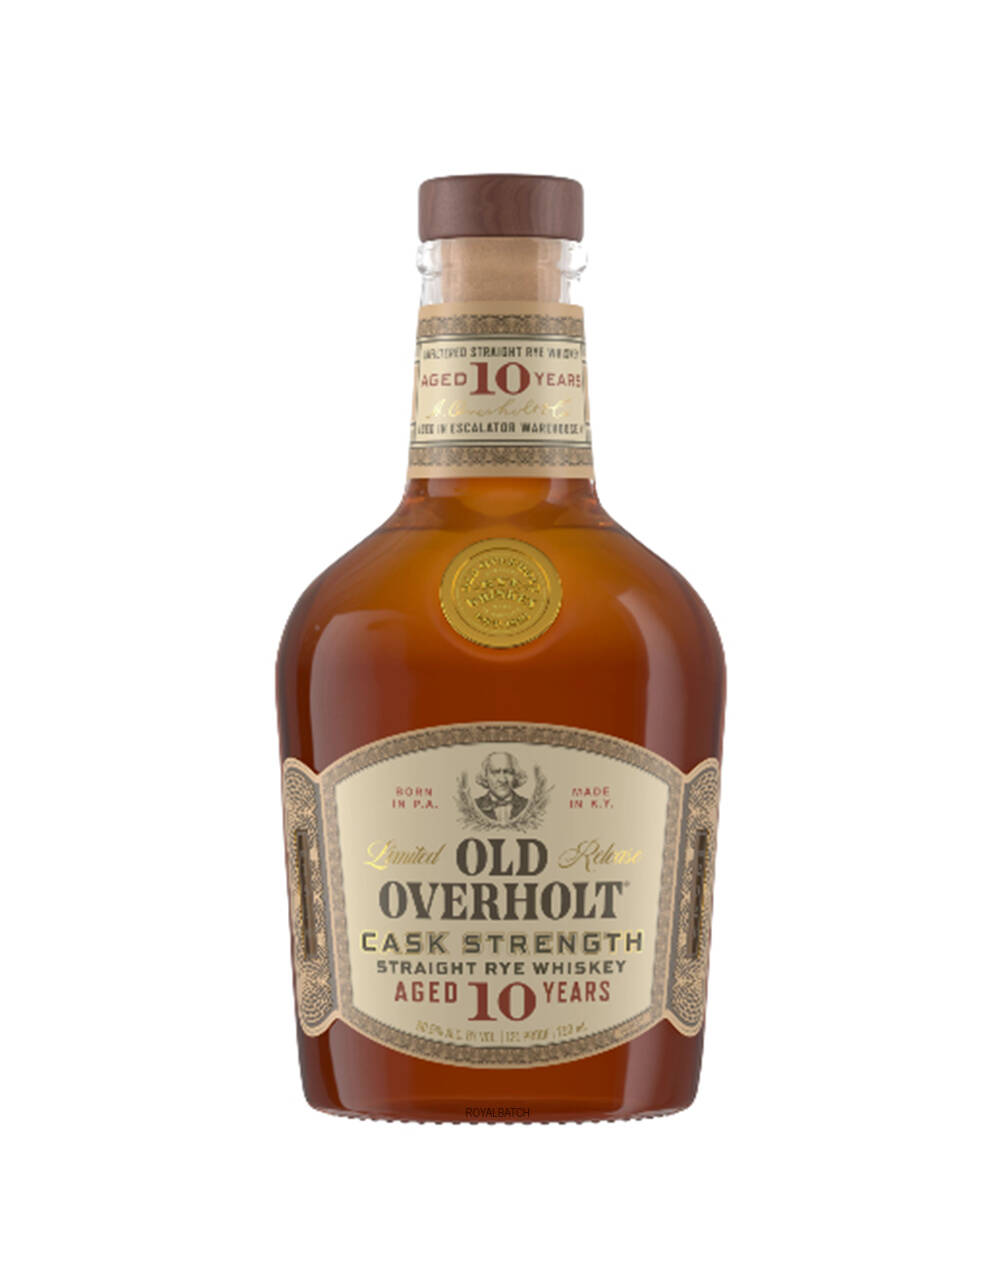 Old Overholt Cask Strength 10 Year Old Limited Release Straight Rye Whiskey